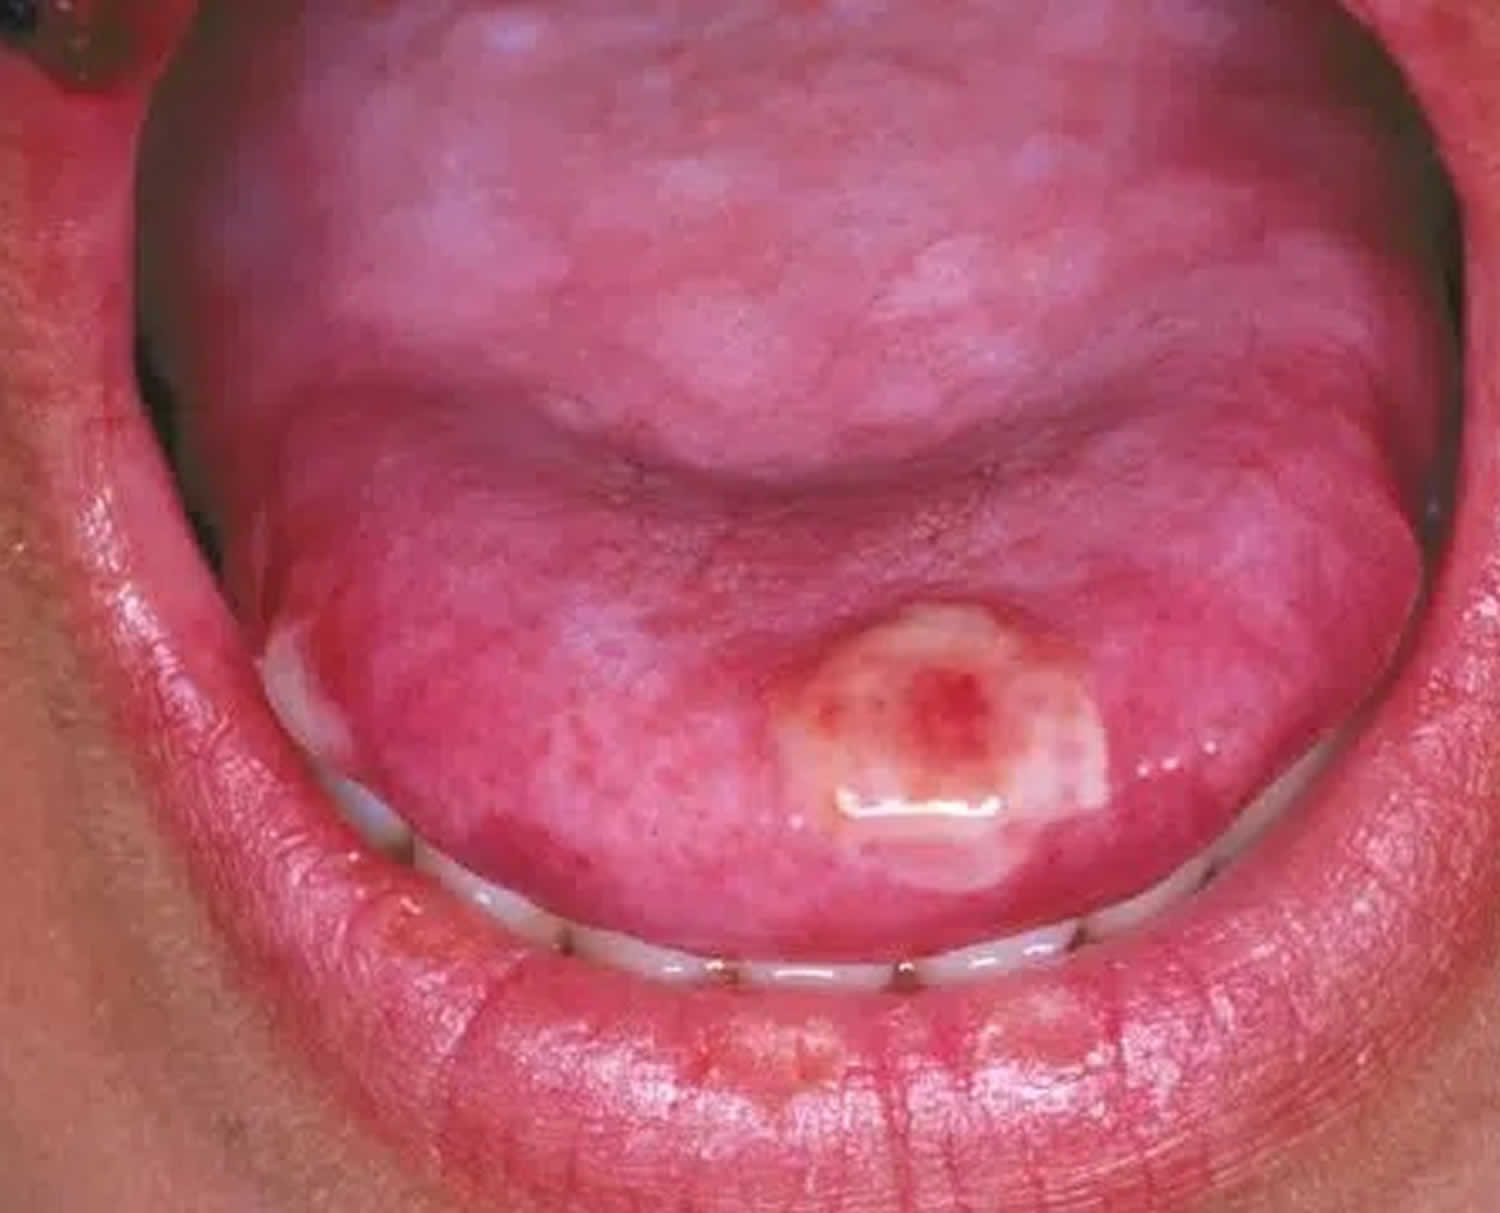 oral herpes tongue